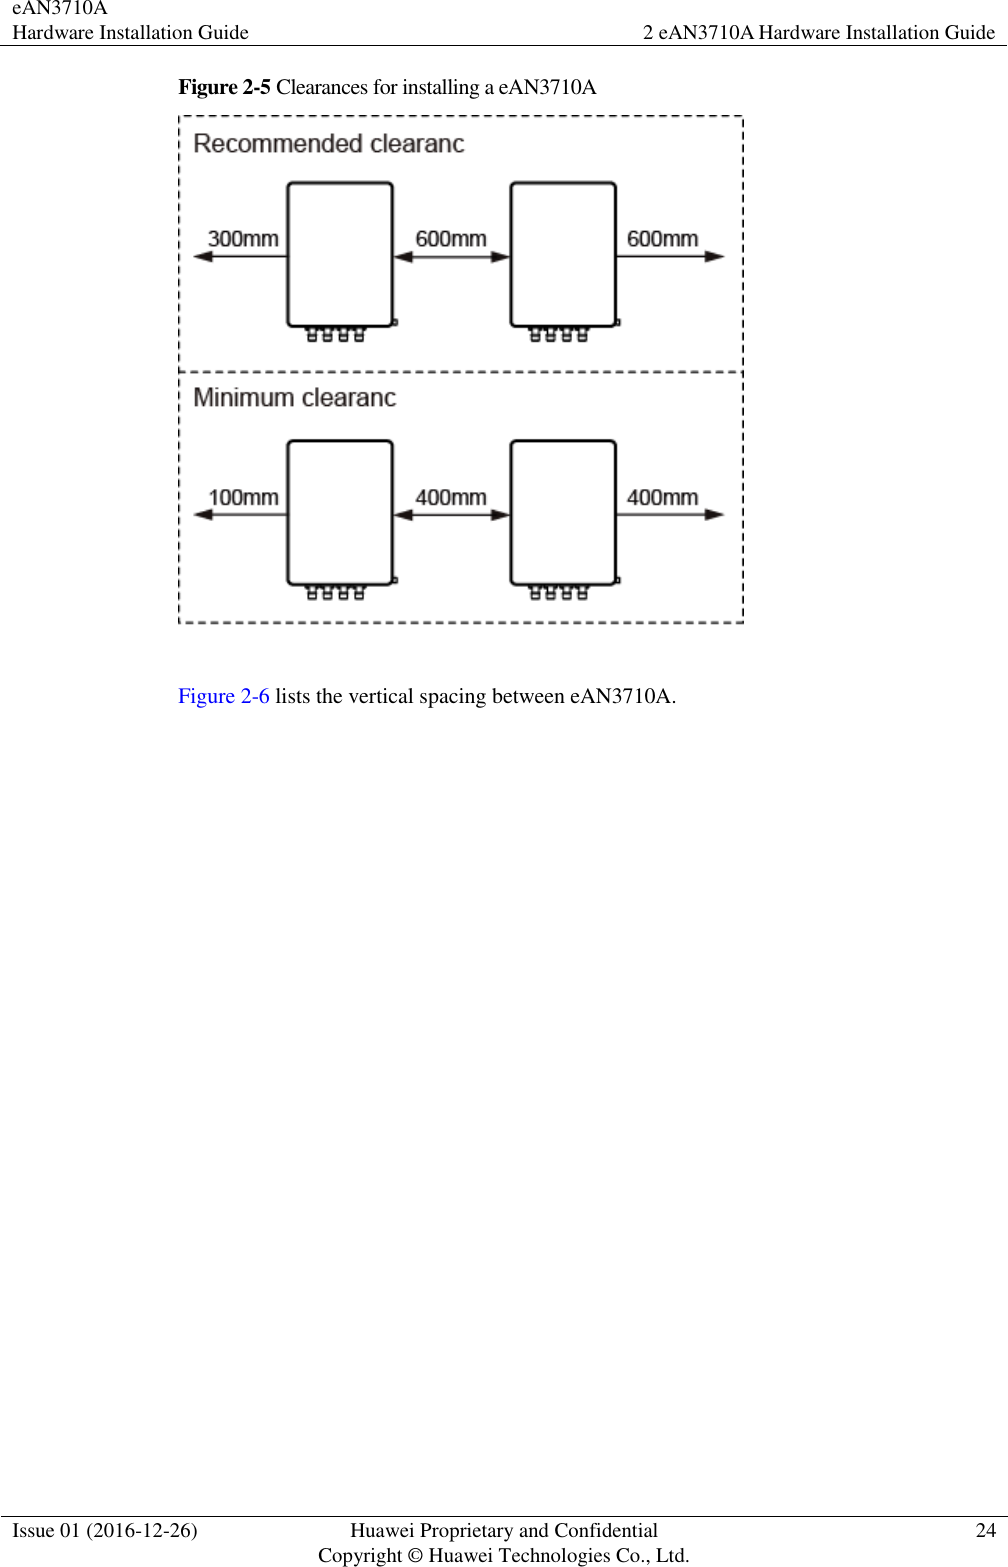 eAN3710A Hardware Installation Guide 2 eAN3710A Hardware Installation Guide  Issue 01 (2016-12-26) Huawei Proprietary and Confidential                                     Copyright © Huawei Technologies Co., Ltd. 24  Figure 2-5 Clearances for installing a eAN3710A   Figure 2-6 lists the vertical spacing between eAN3710A. 